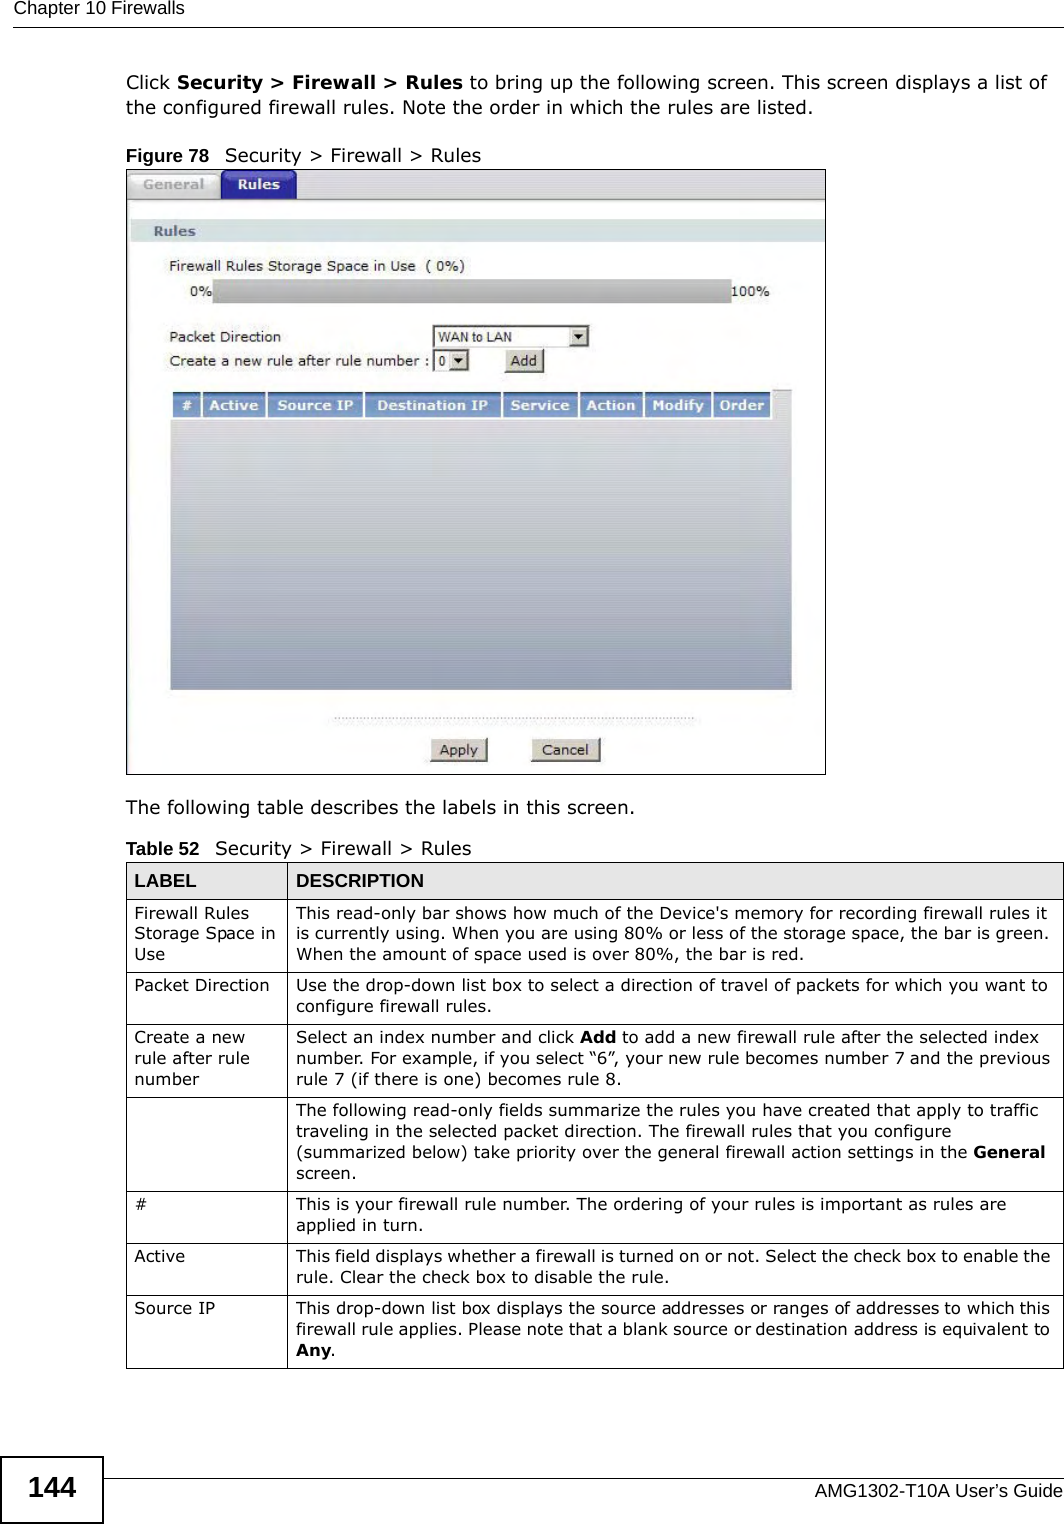 Chapter 10 FirewallsAMG1302-T10A User’s Guide144Click Security &gt; Firewall &gt; Rules to bring up the following screen. This screen displays a list of the configured firewall rules. Note the order in which the rules are listed.Figure 78   Security &gt; Firewall &gt; Rules The following table describes the labels in this screen.  Table 52   Security &gt; Firewall &gt; RulesLABEL DESCRIPTIONFirewall Rules Storage Space in UseThis read-only bar shows how much of the Device&apos;s memory for recording firewall rules it is currently using. When you are using 80% or less of the storage space, the bar is green. When the amount of space used is over 80%, the bar is red.Packet Direction Use the drop-down list box to select a direction of travel of packets for which you want to configure firewall rules.Create a new rule after rule number Select an index number and click Add to add a new firewall rule after the selected index number. For example, if you select “6”, your new rule becomes number 7 and the previous rule 7 (if there is one) becomes rule 8.The following read-only fields summarize the rules you have created that apply to traffic traveling in the selected packet direction. The firewall rules that you configure (summarized below) take priority over the general firewall action settings in the General screen.#This is your firewall rule number. The ordering of your rules is important as rules are applied in turn. Active This field displays whether a firewall is turned on or not. Select the check box to enable the rule. Clear the check box to disable the rule.Source IP This drop-down list box displays the source addresses or ranges of addresses to which this firewall rule applies. Please note that a blank source or destination address is equivalent to Any.